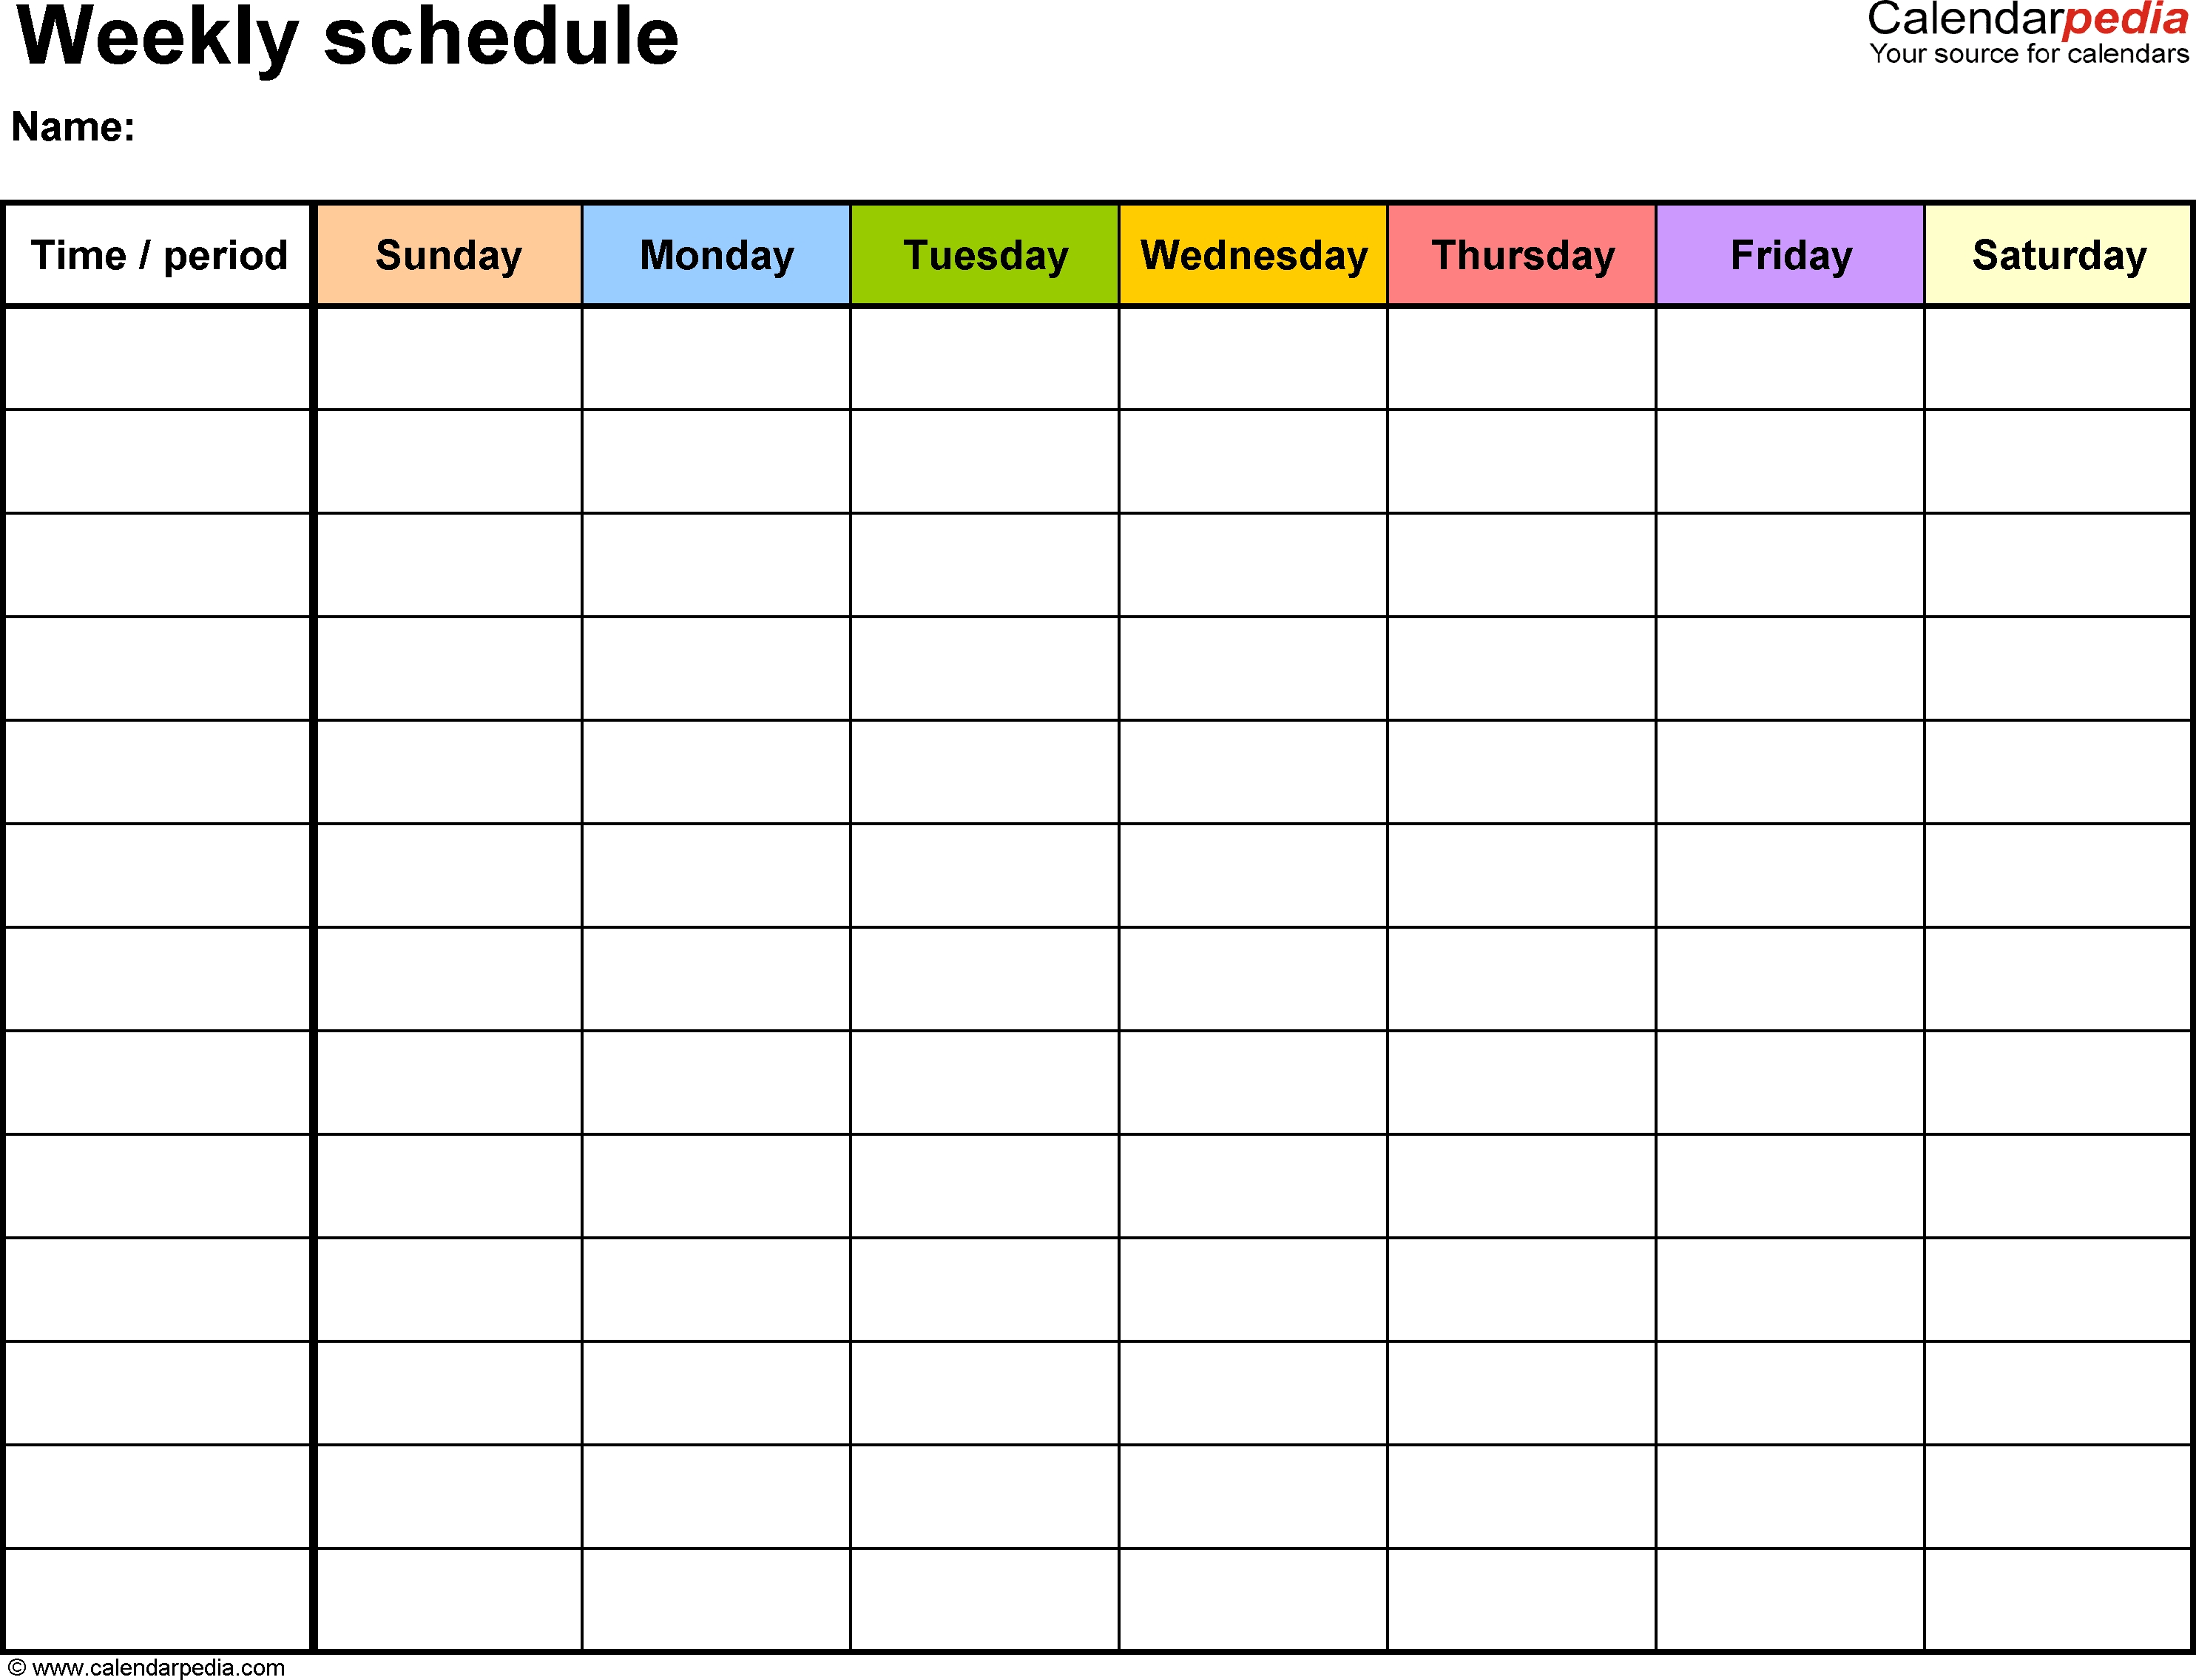 Free Weekly Schedule Templates For Excel - 18 Templates with Printable Daily Schedule With Time